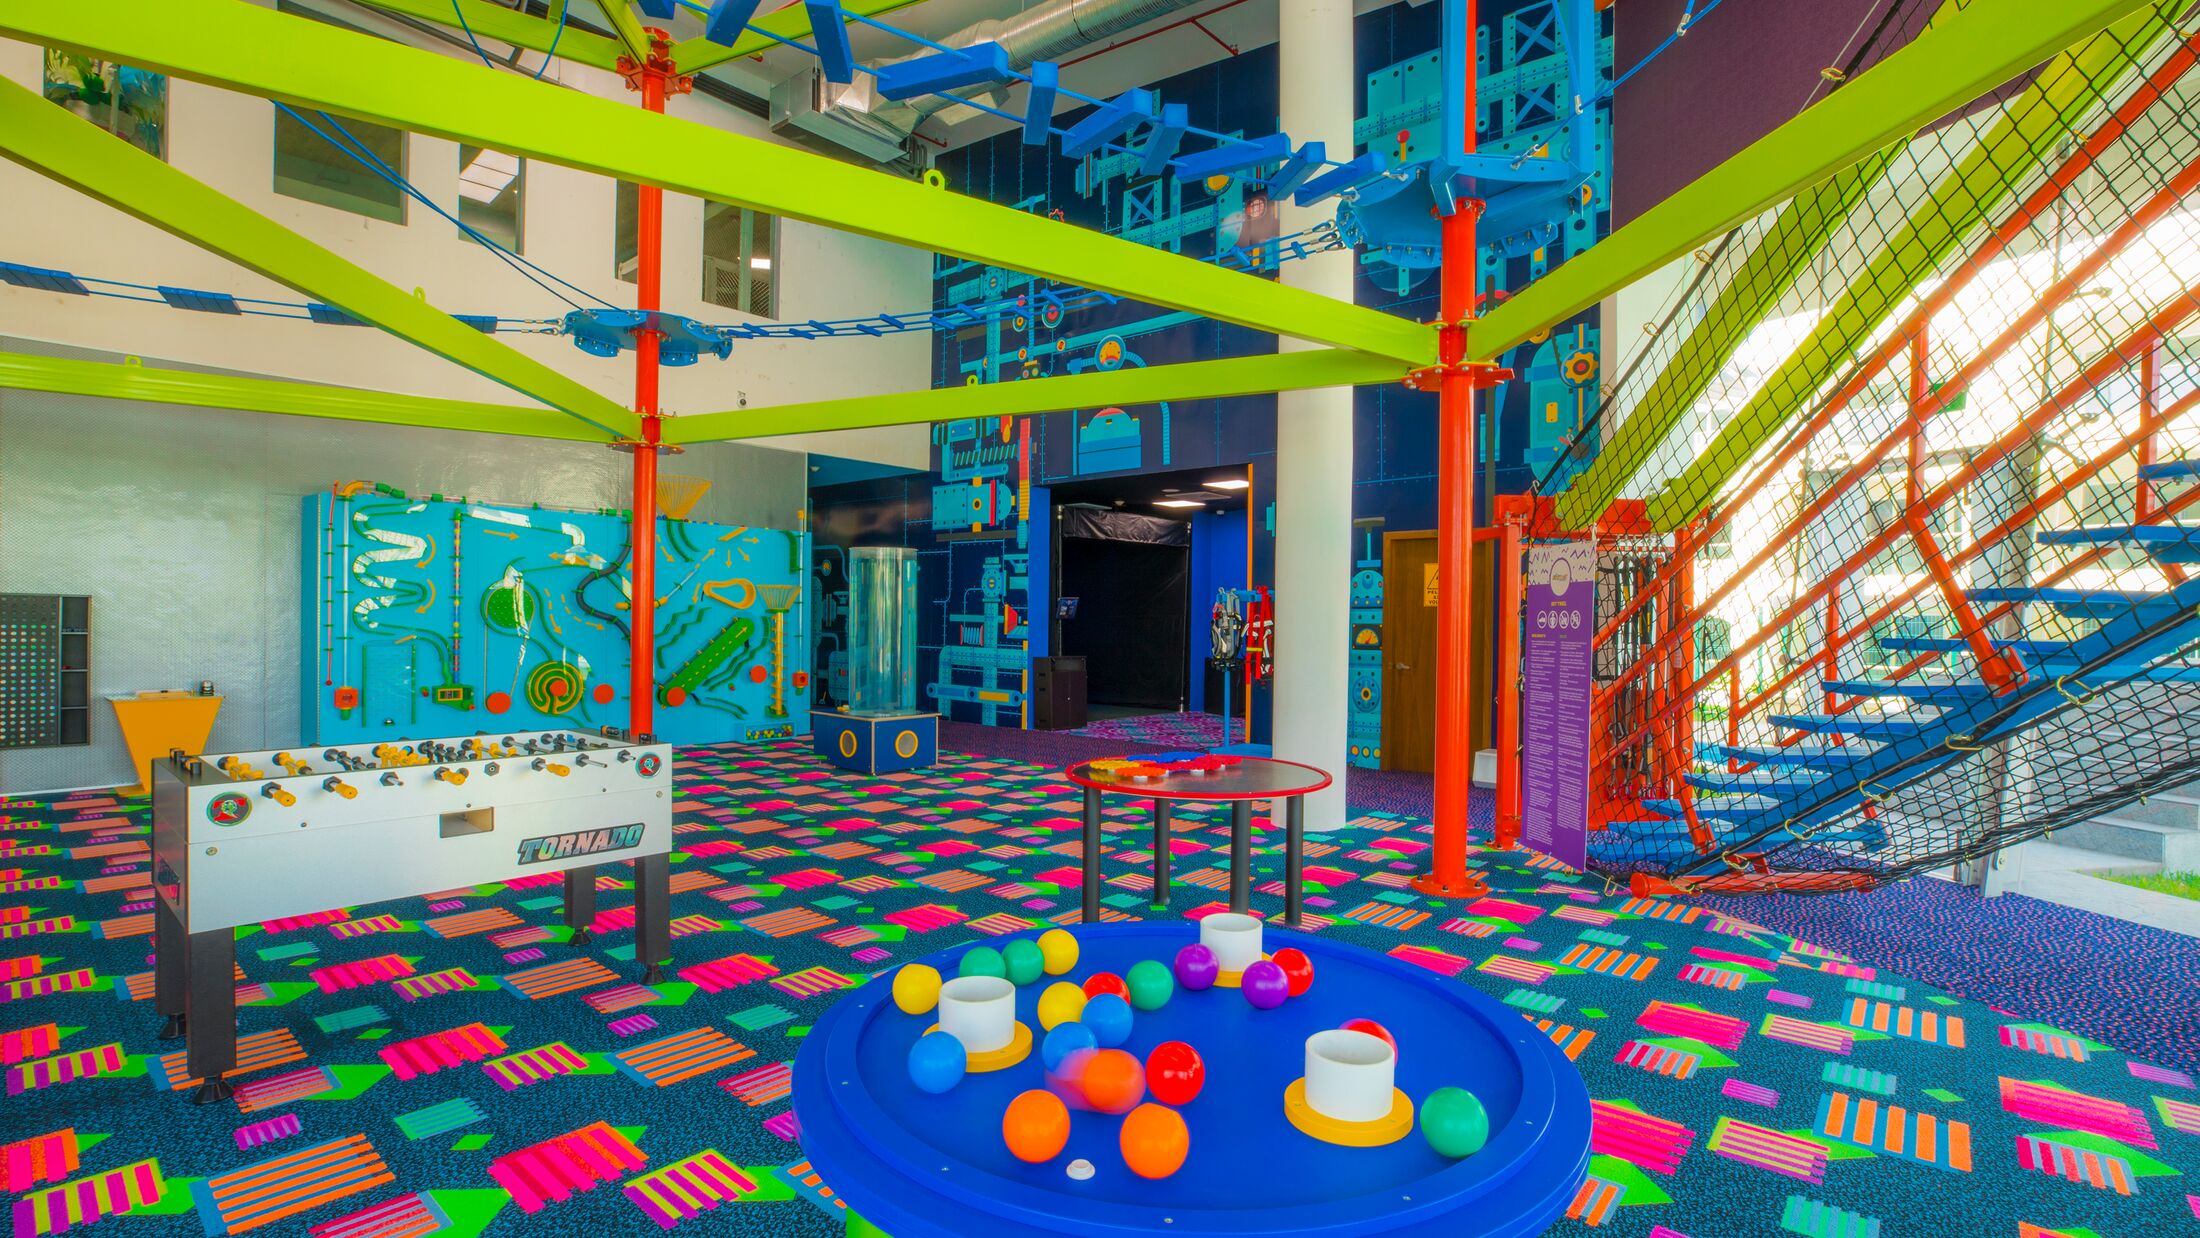 Playroom.Moon Palace The Grand Cancun, architecture, Playroom, Waterpark, Kids, Kid's, Children, Fusball Table, Zipline, Rope Course.Moon Palace The Grand Cancun Architecture